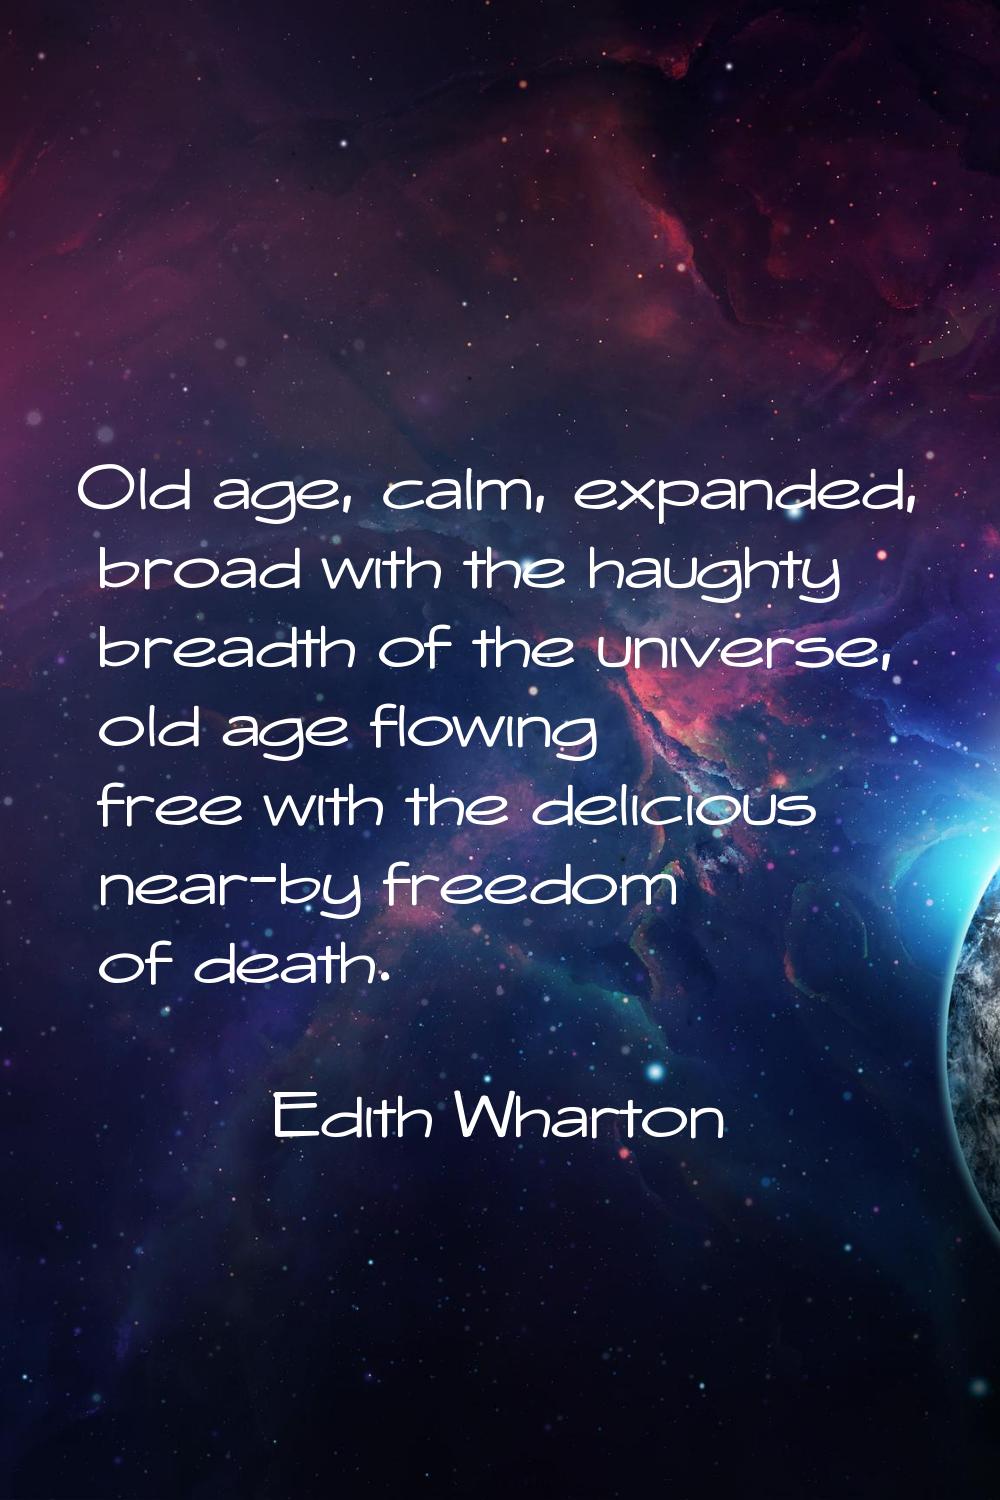 Old age, calm, expanded, broad with the haughty breadth of the universe, old age flowing free with 